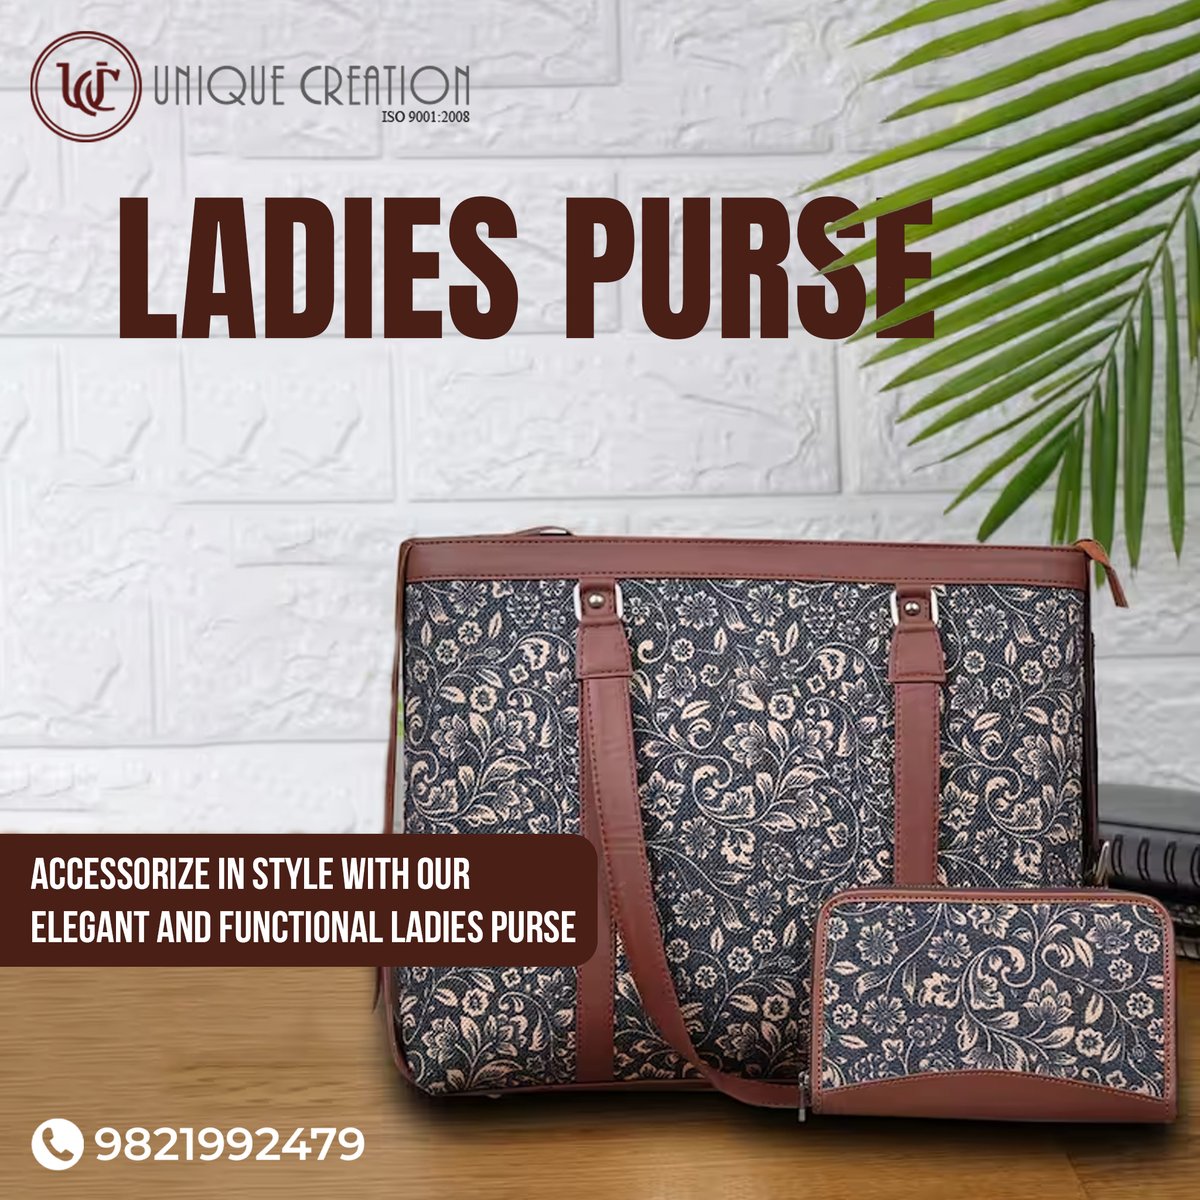 Accessorize in style with our elegant and versatile #ladiespurse, perfect for both casual and formal occasions.
Call us at 9821992479 for #wholesale queries.
#supplier #distributor #exporter